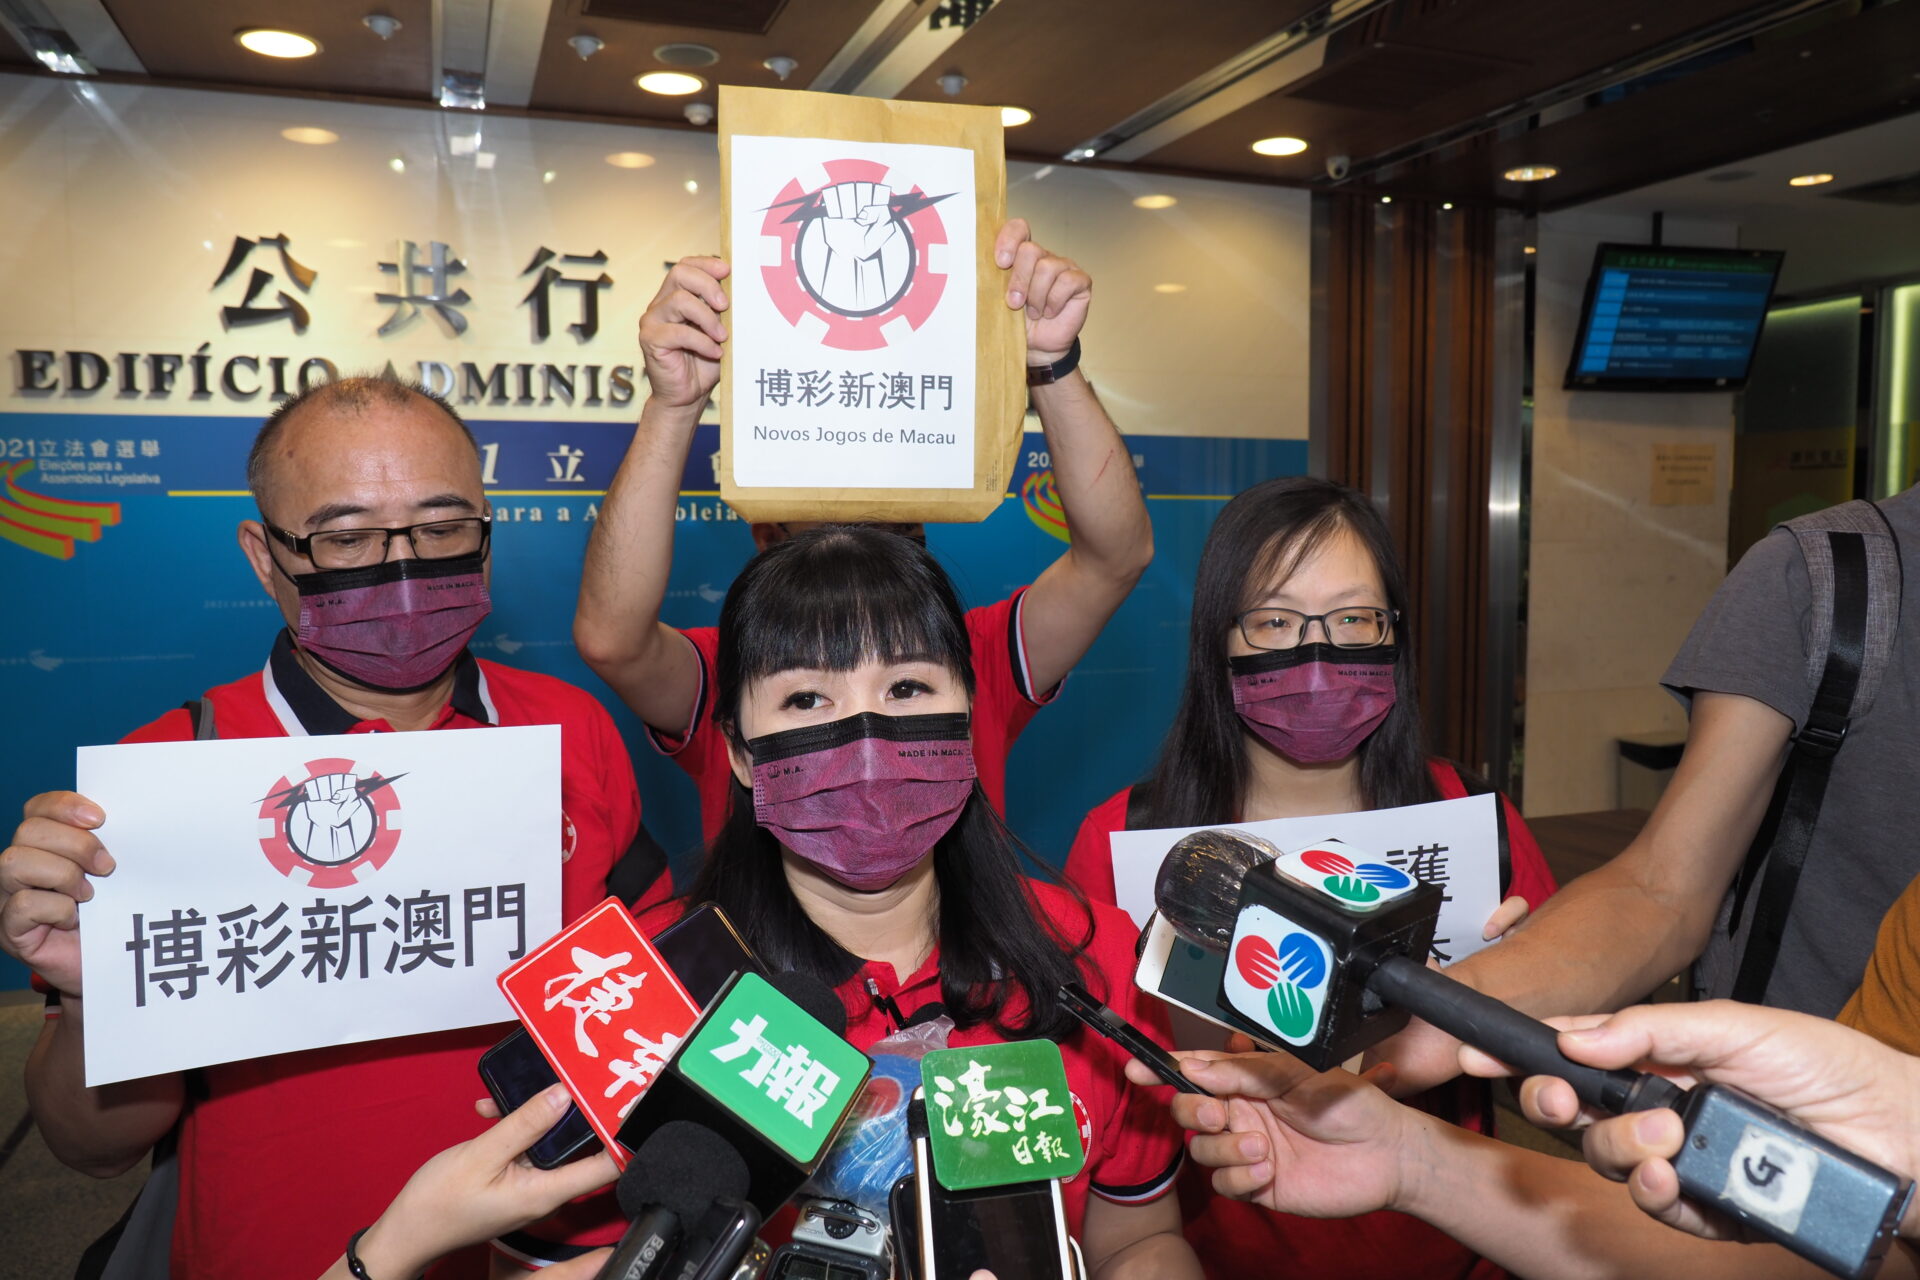 Labour activist Cloee Chao Sao Fong vows to help casino workers